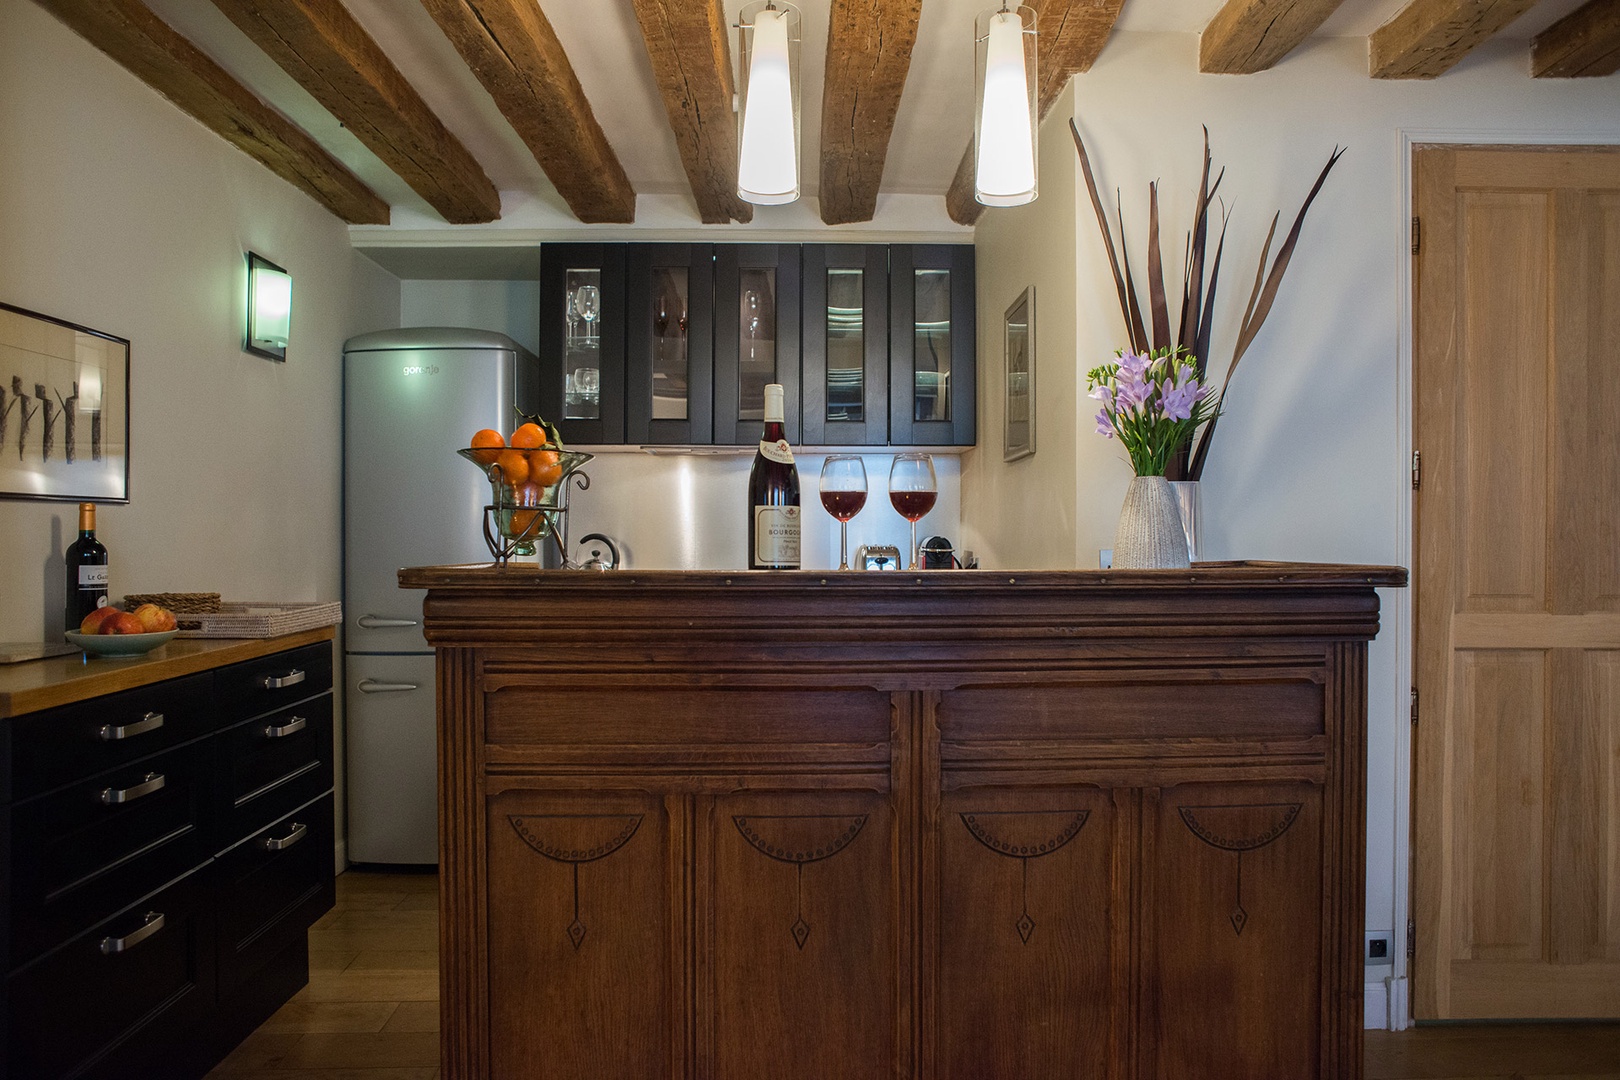 The kitchen also includes a classic bar area, perfect for apero hour.